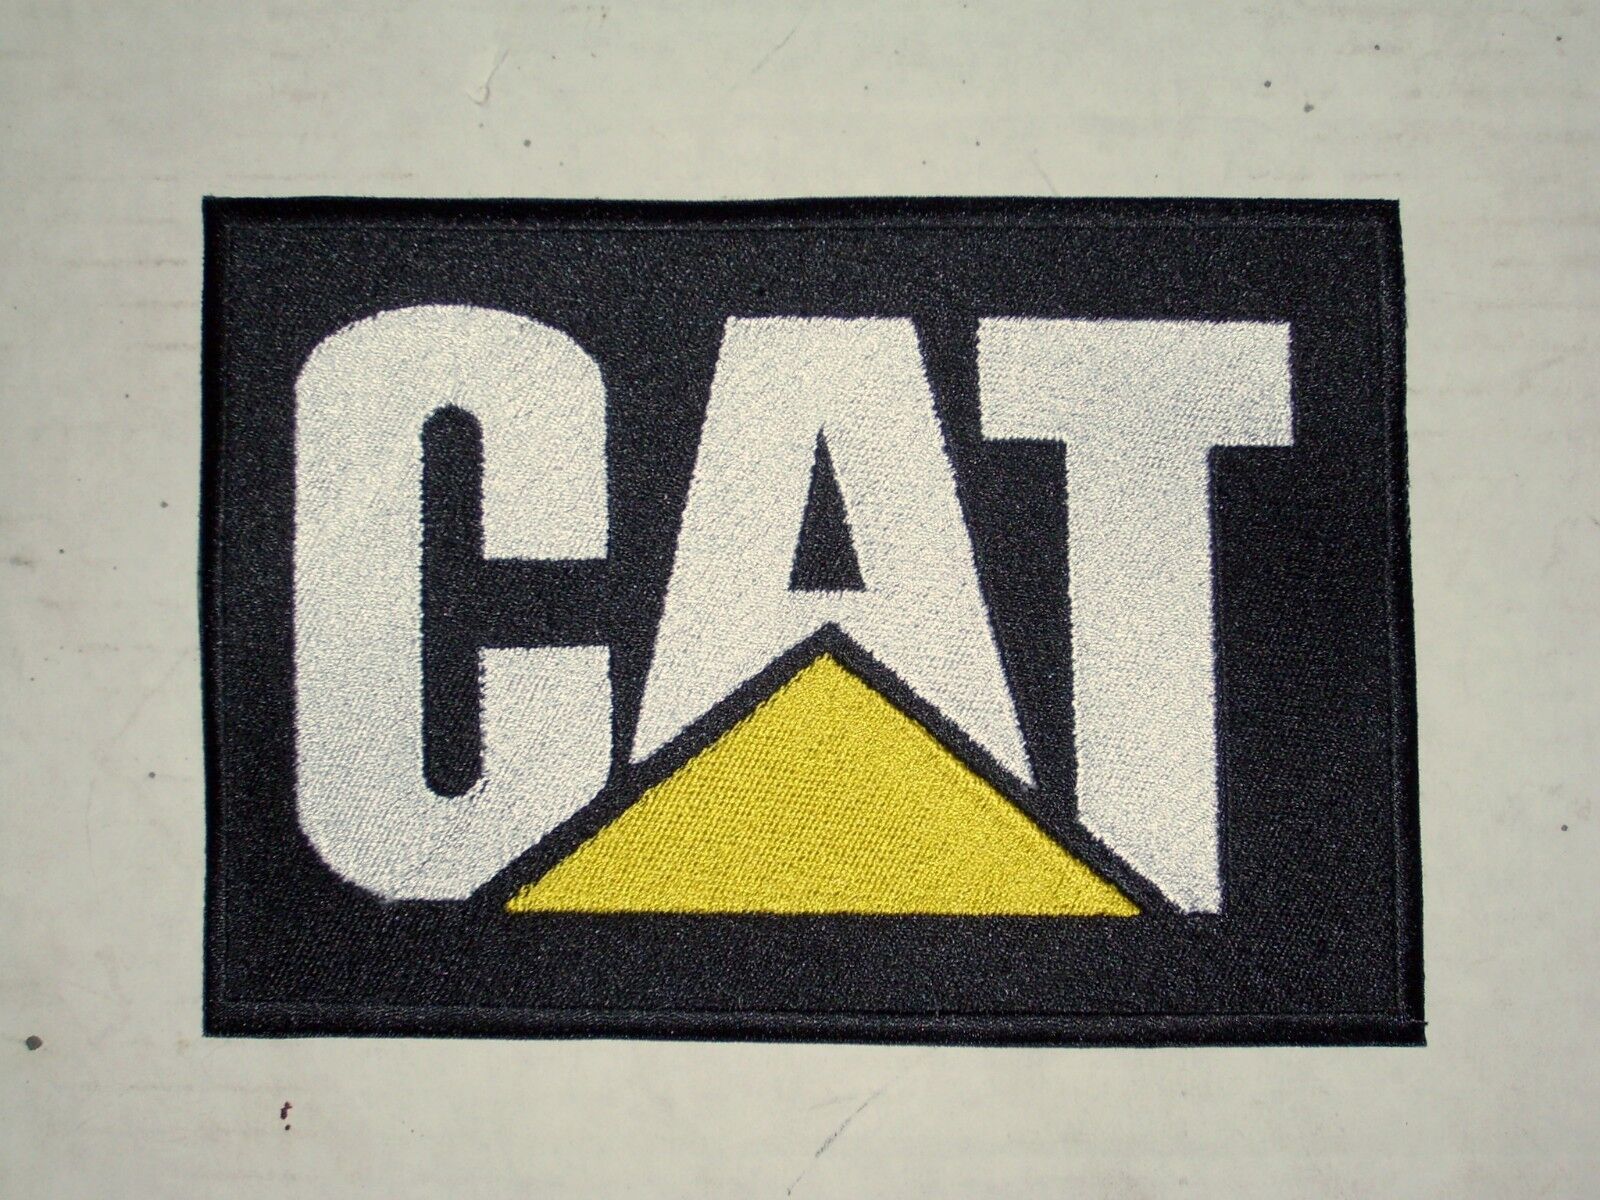 Large 5x7 CAT Caterpillar Embroidered Patch, sew on